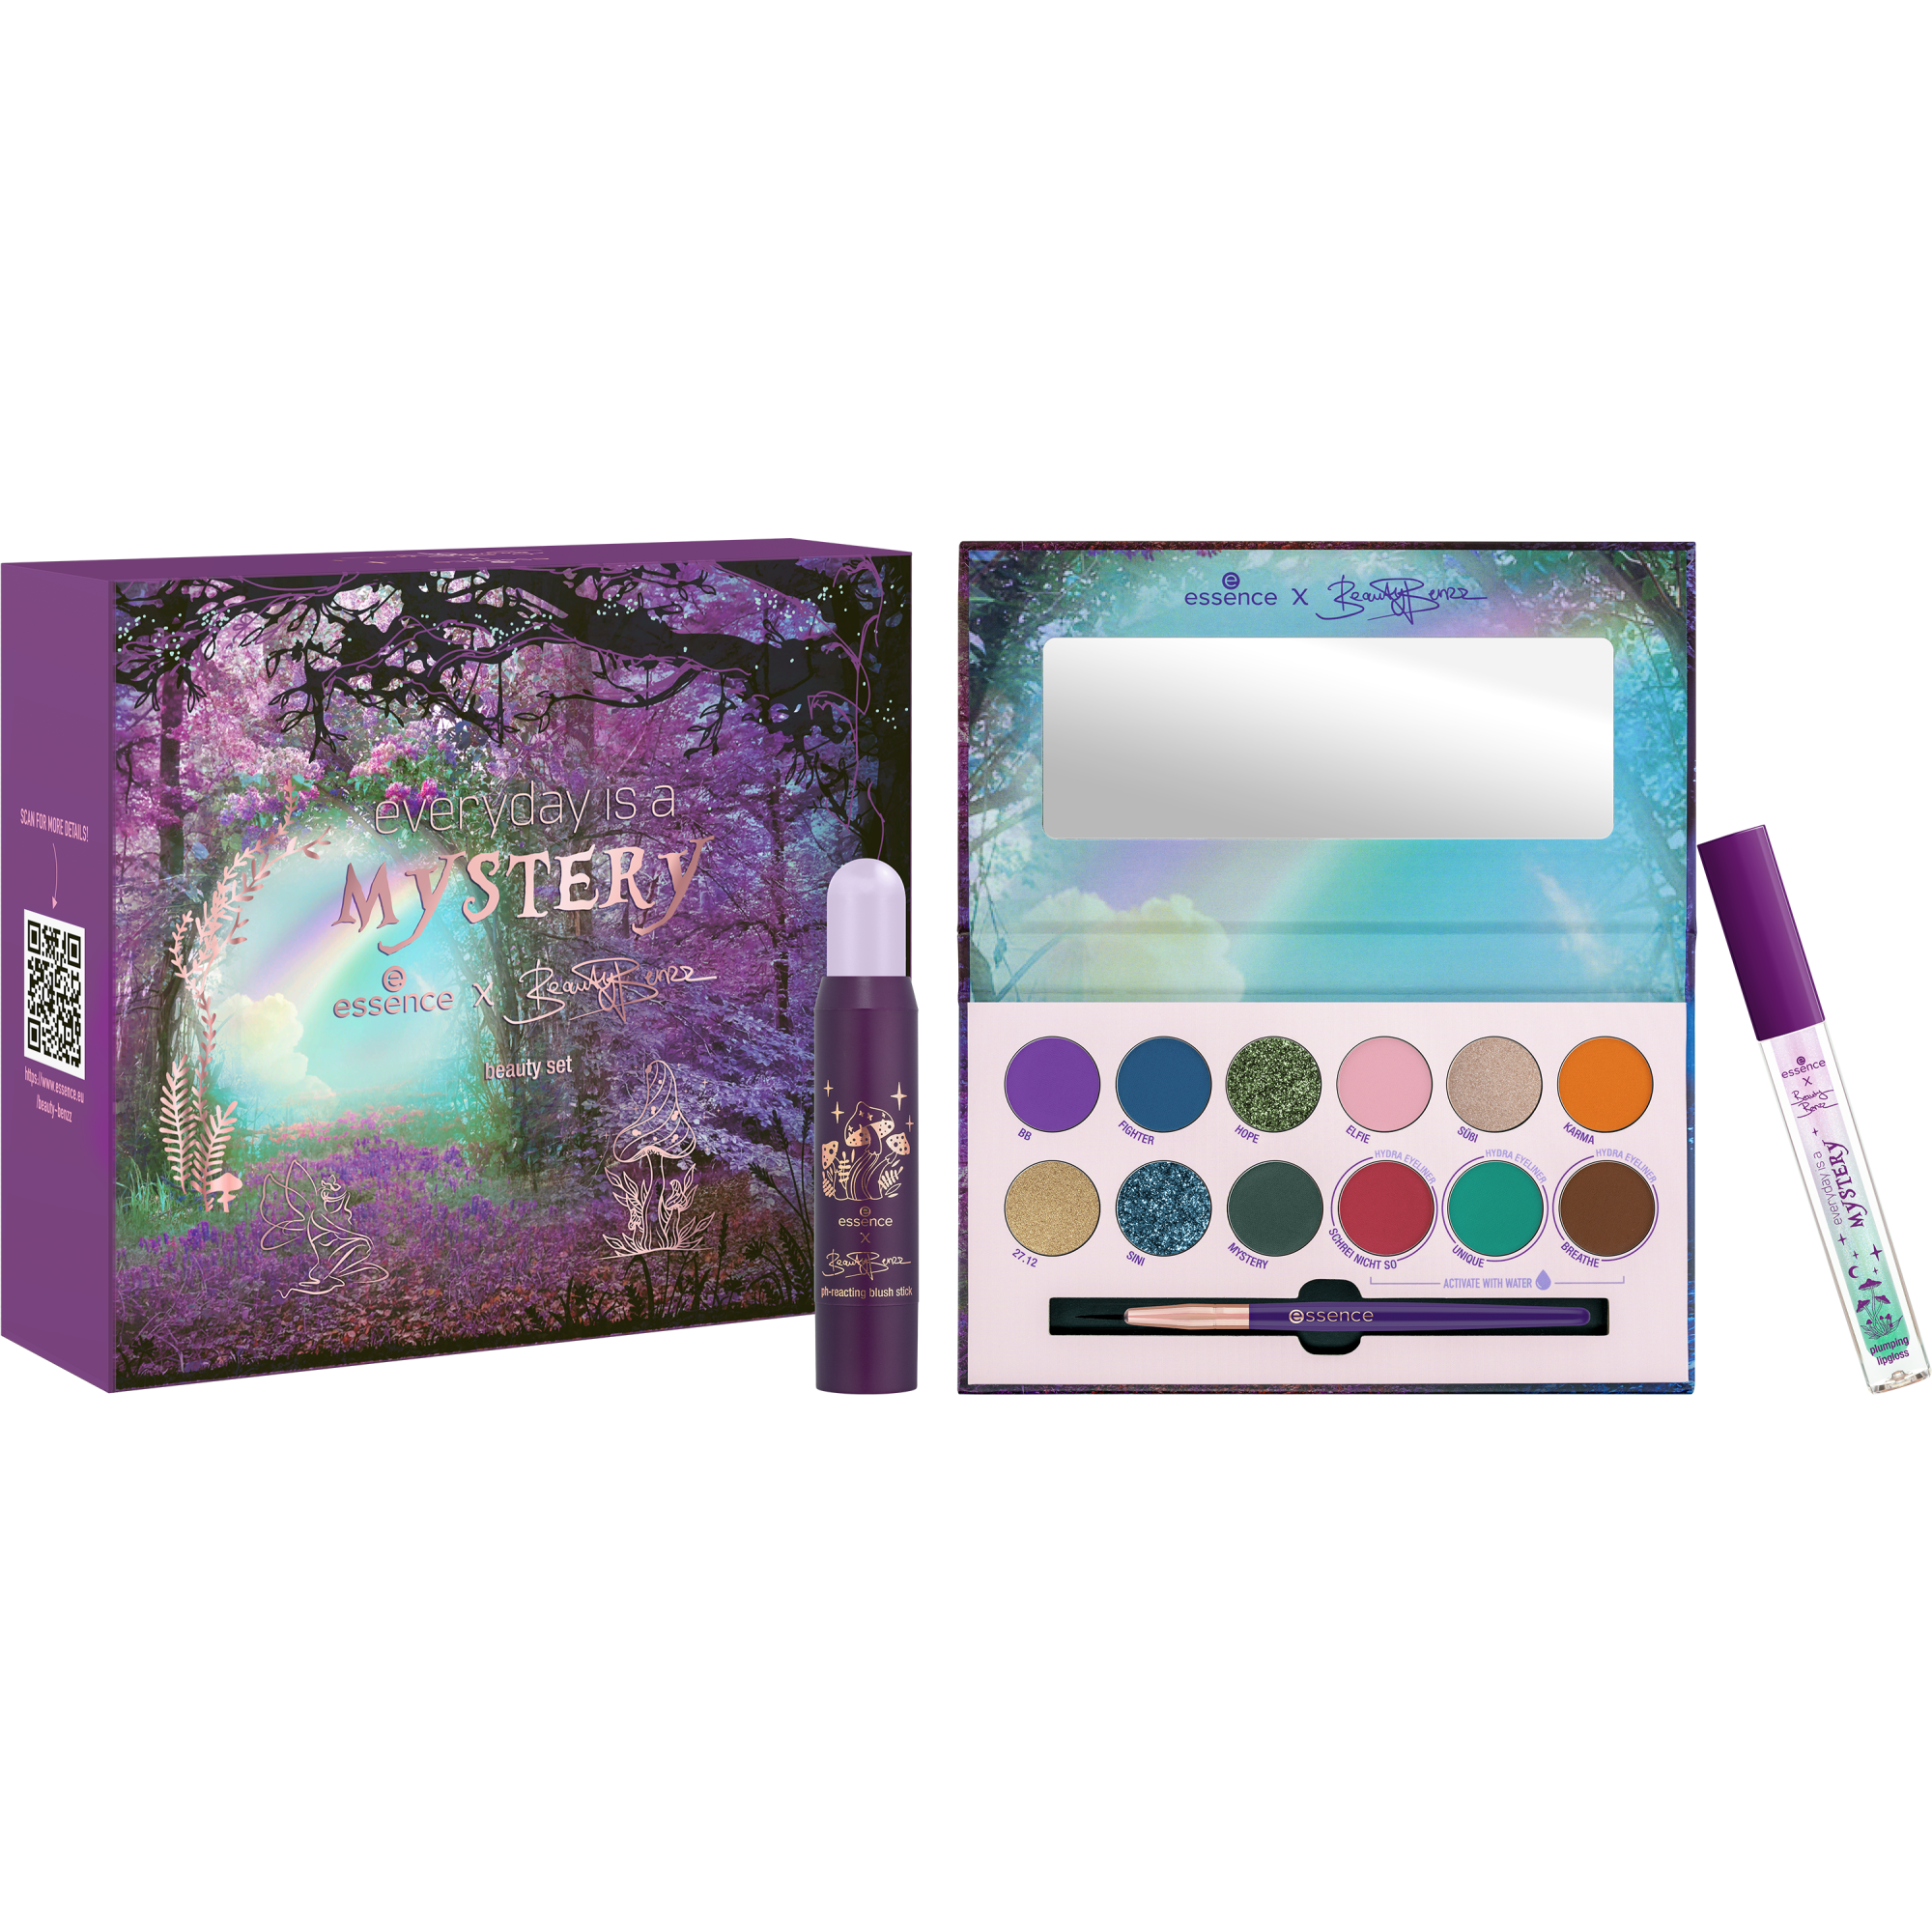 x Beauty Benzz everyday is a MYSTERY beauty set